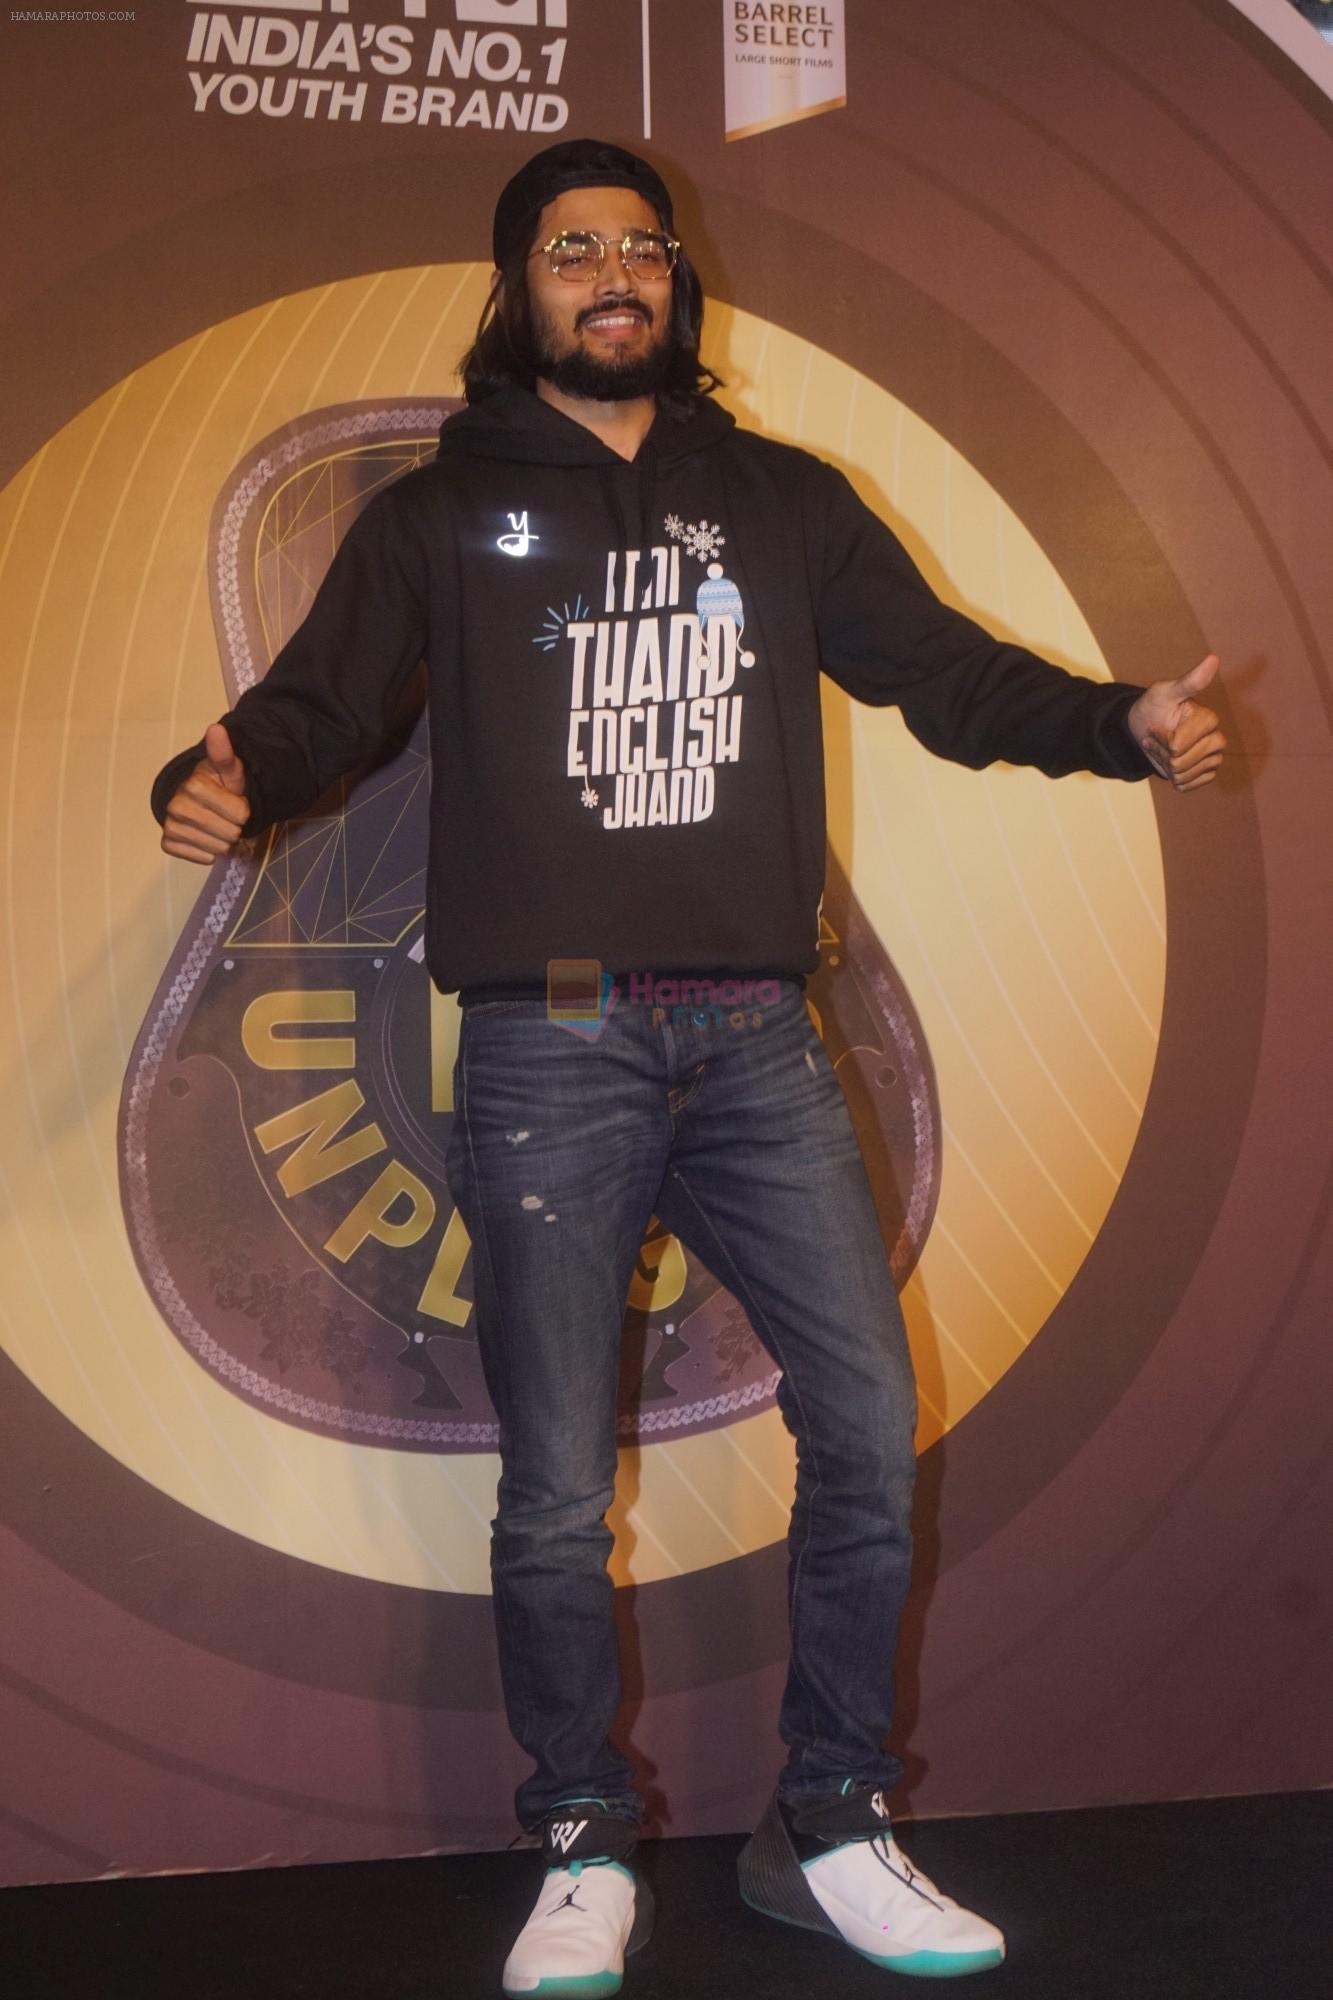 at The launch of Royal Stag Barrel Select MTV Unplugged on 16th Jan 2019